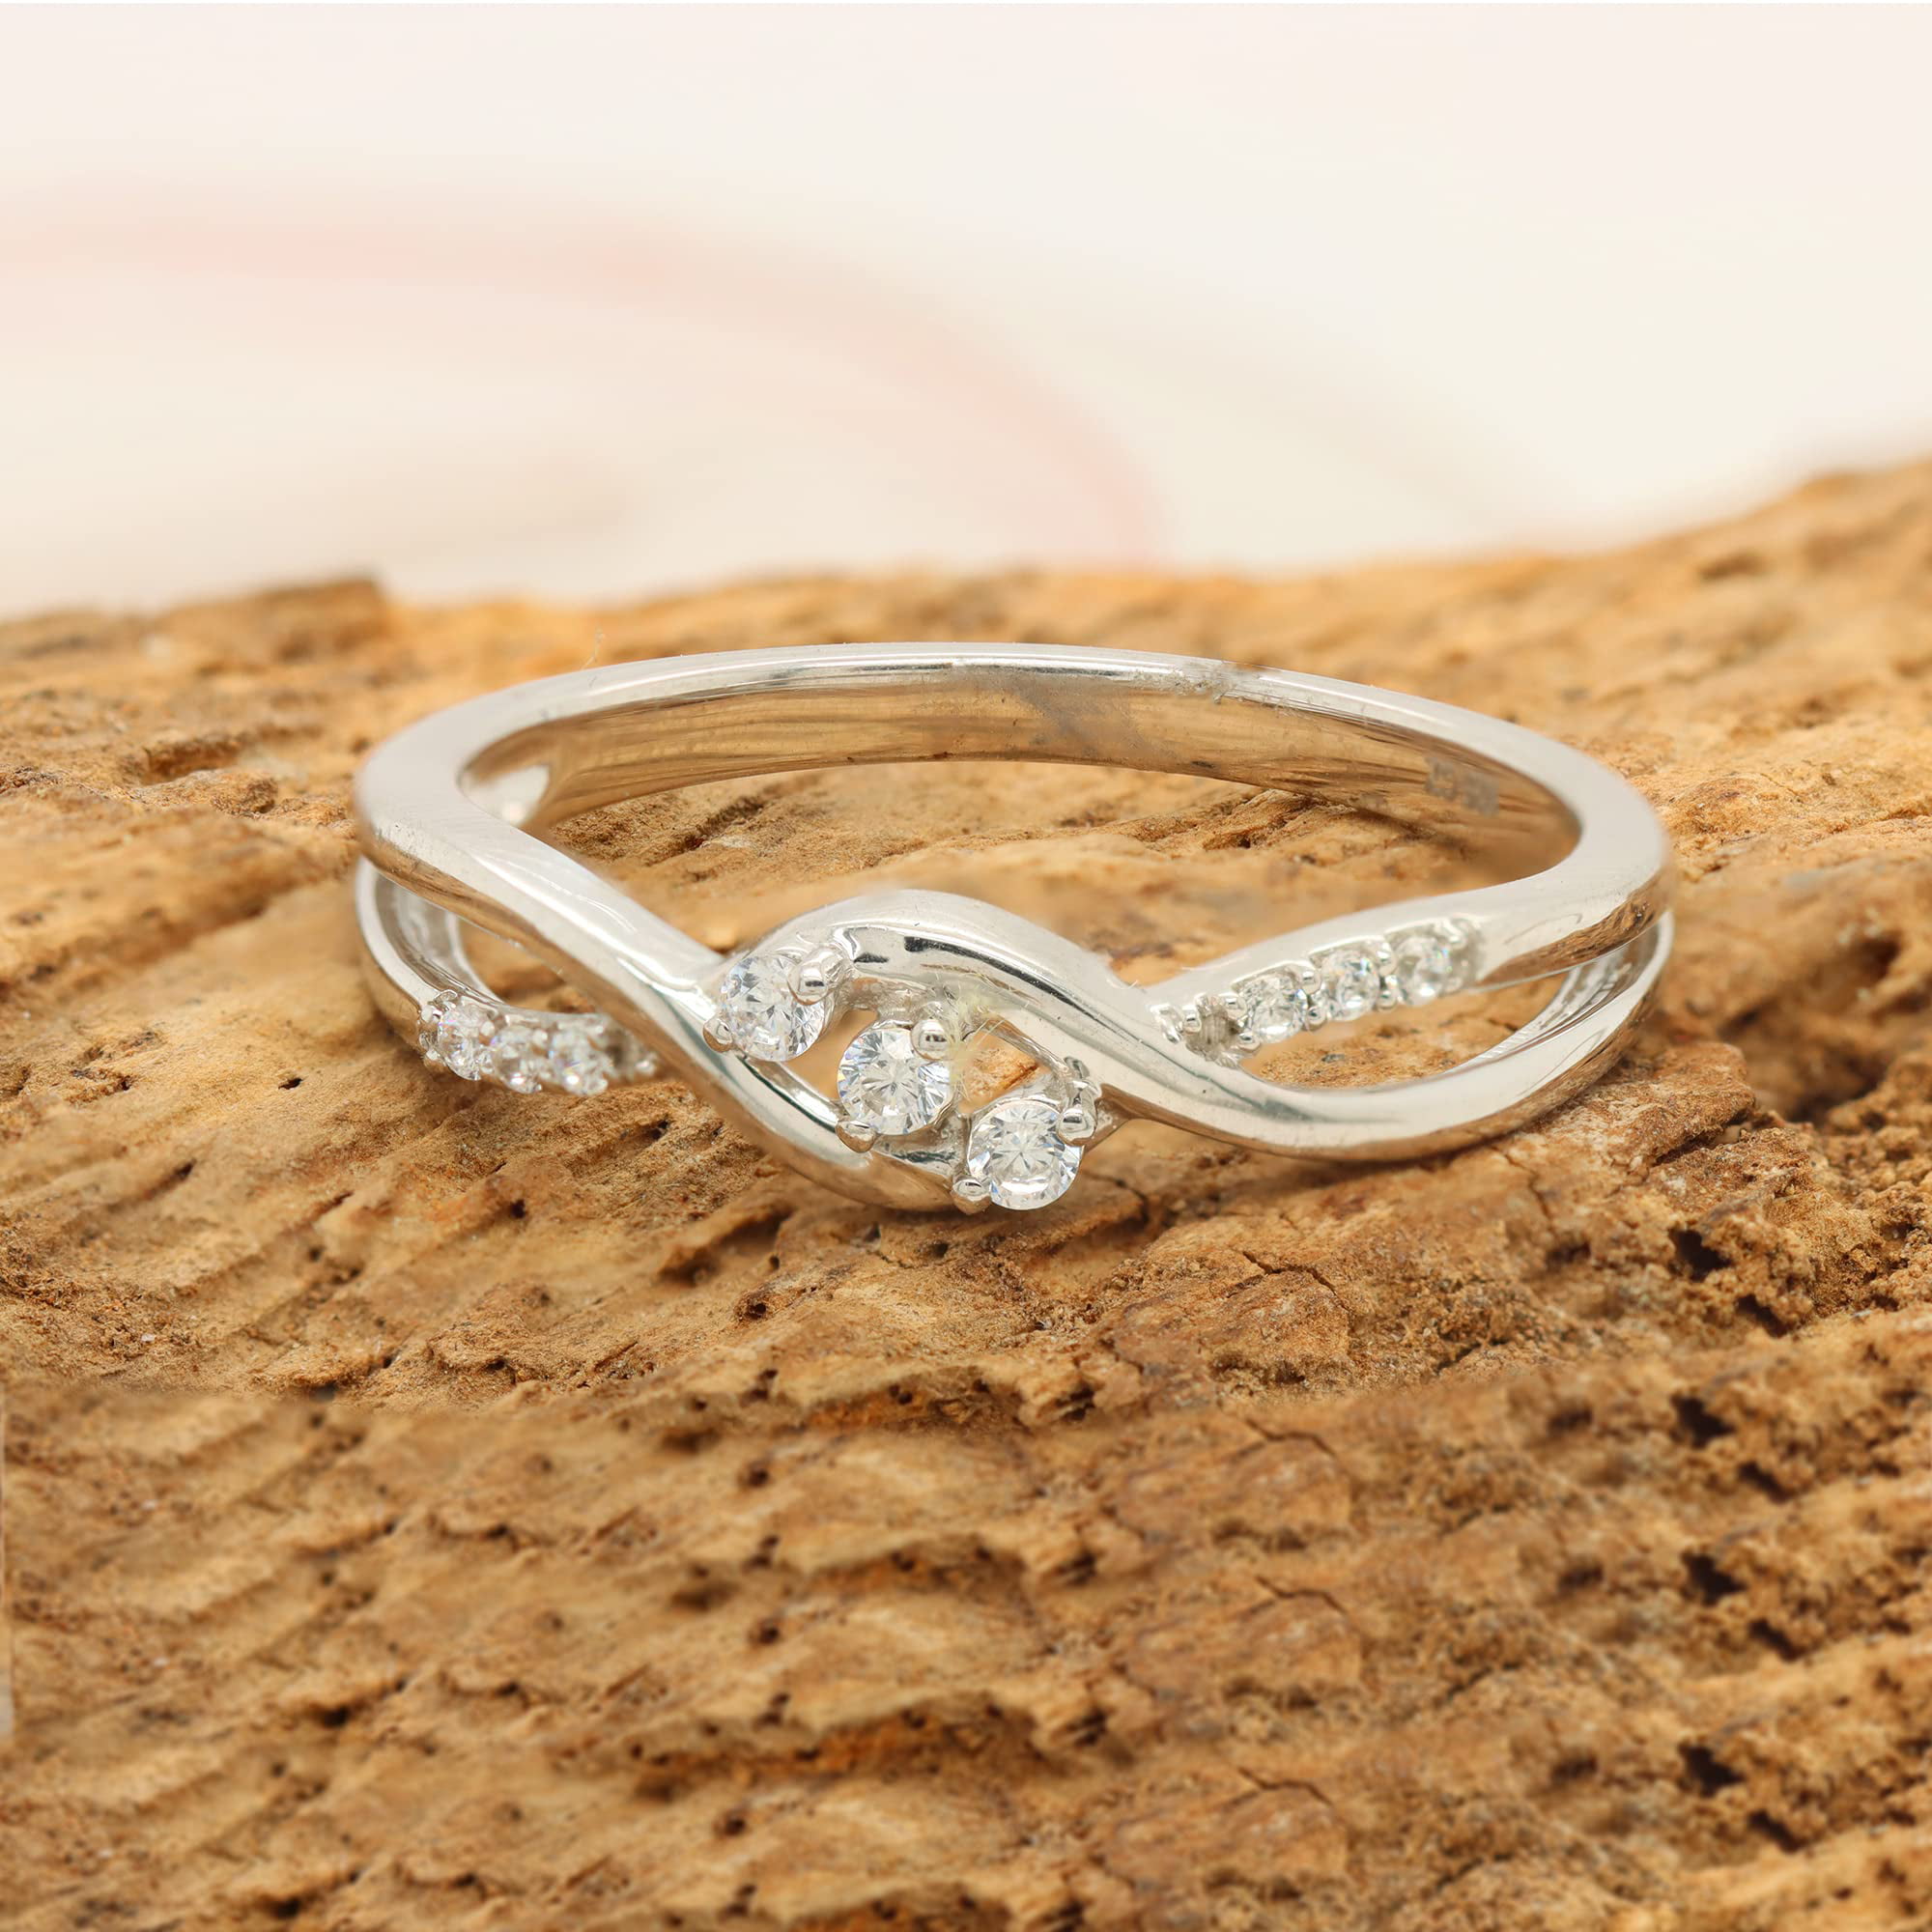 12 Tips for Buying an Engagement Ring